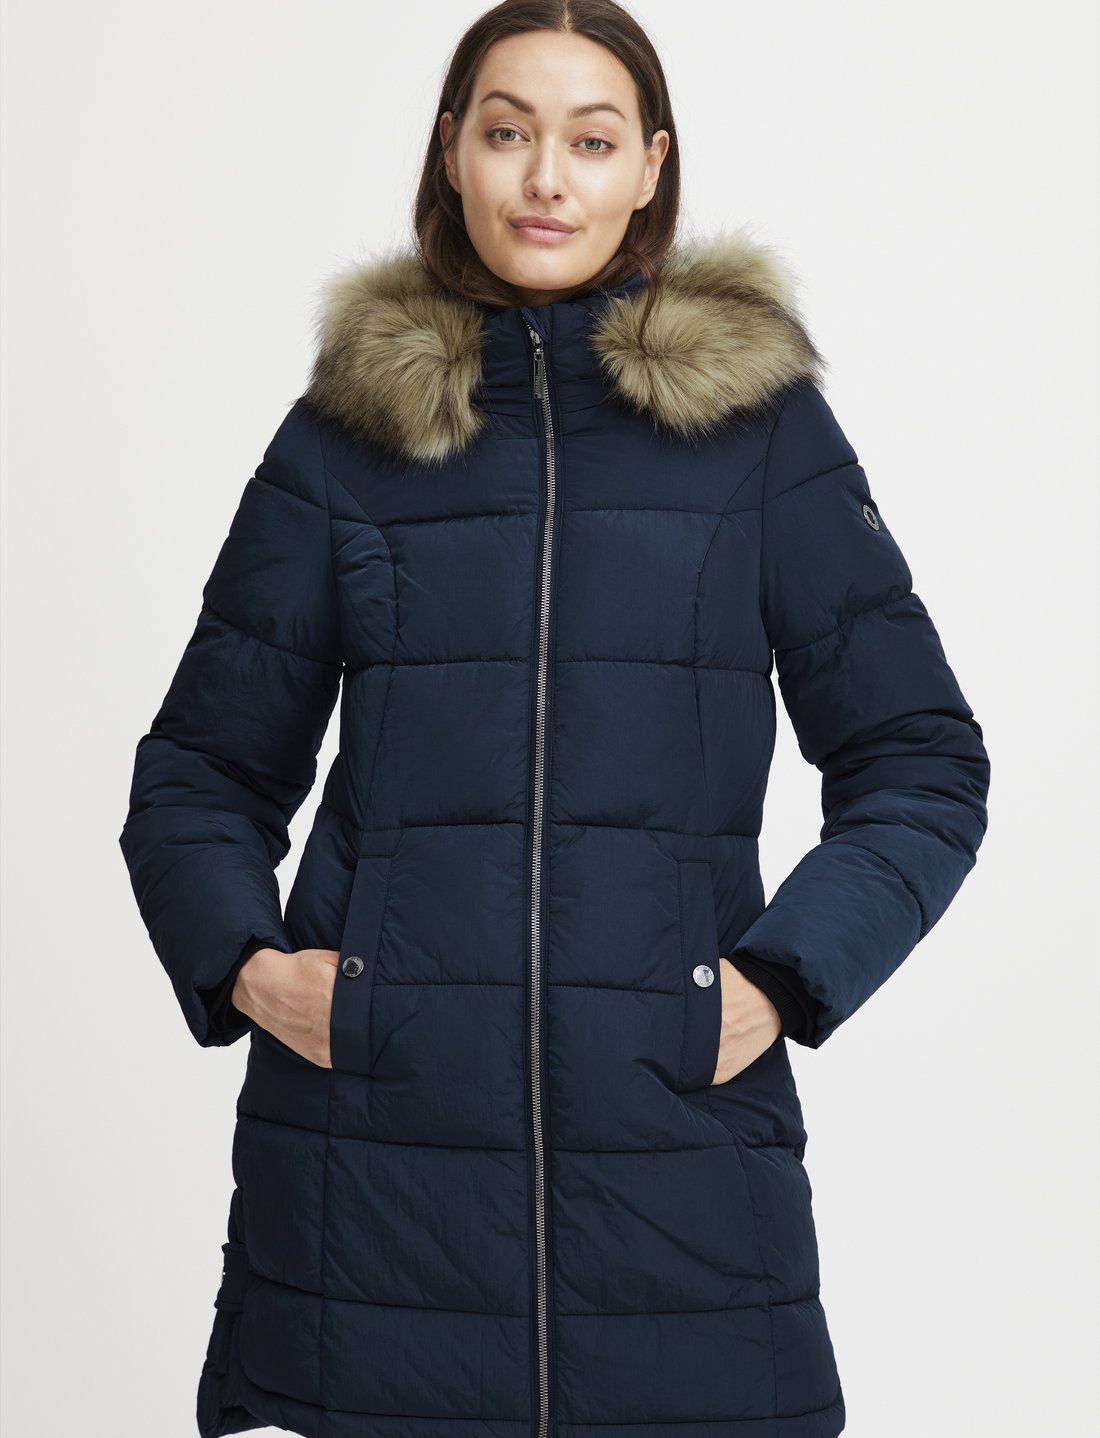 Fransa Frbac Ja 3 - 56 €. Buy Padded Coats from Fransa online at Boozt.com.  Fast delivery and easy returns